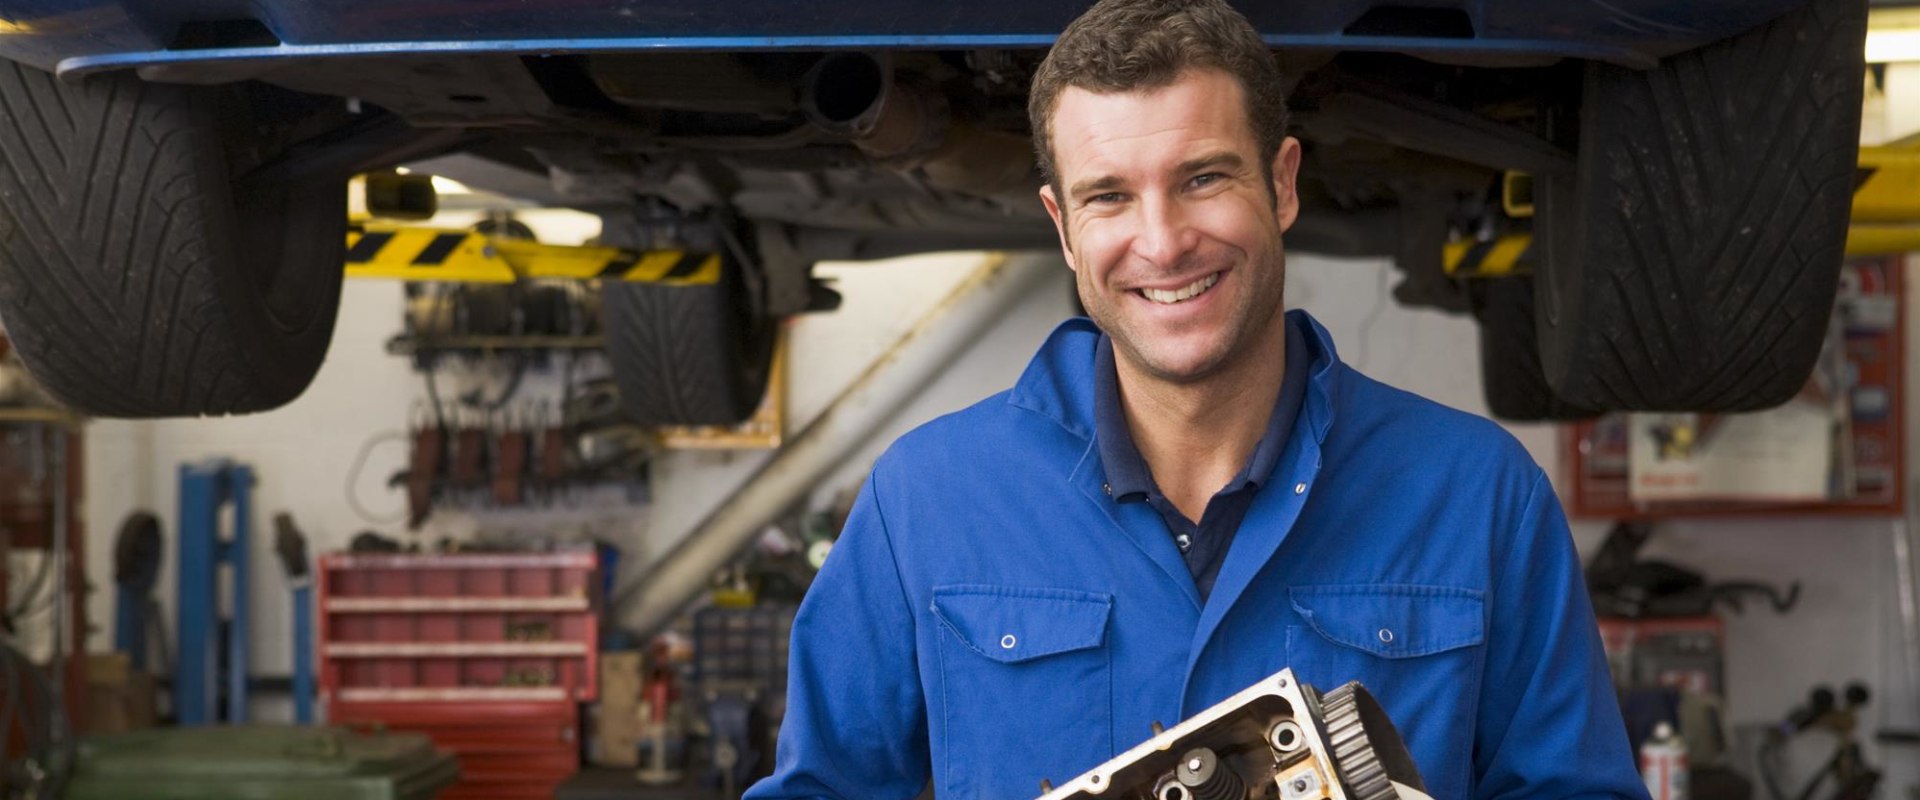 Safety Gear for Auto Repair: What You Need to Know